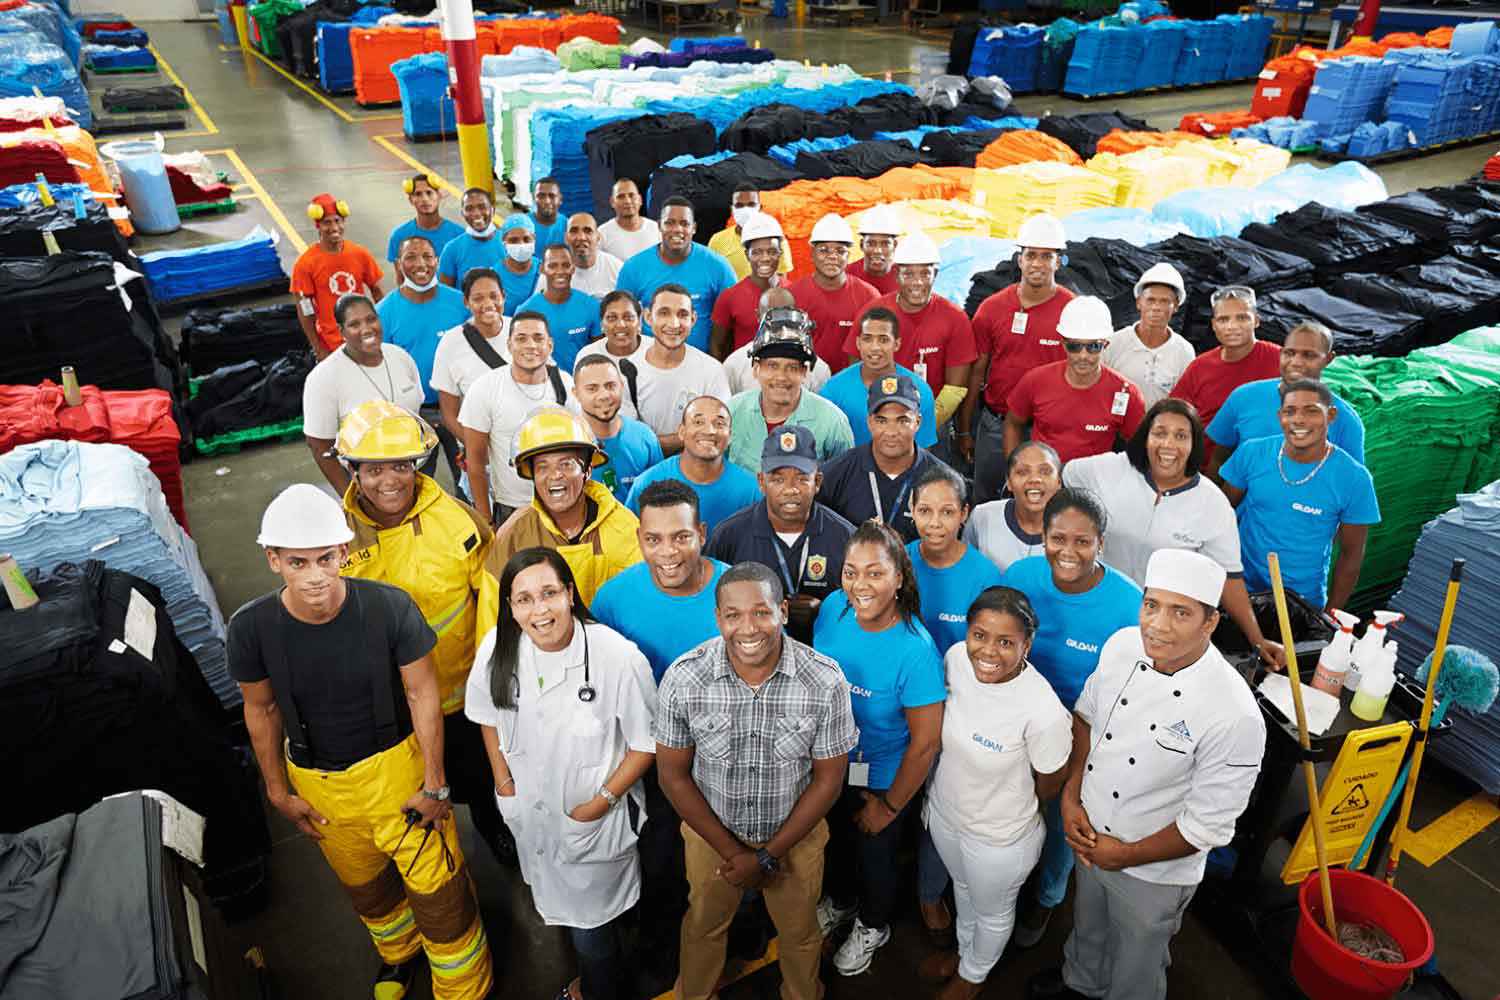 Employees in the Dominican Republic are in a large group smiling and looking up at the camera.